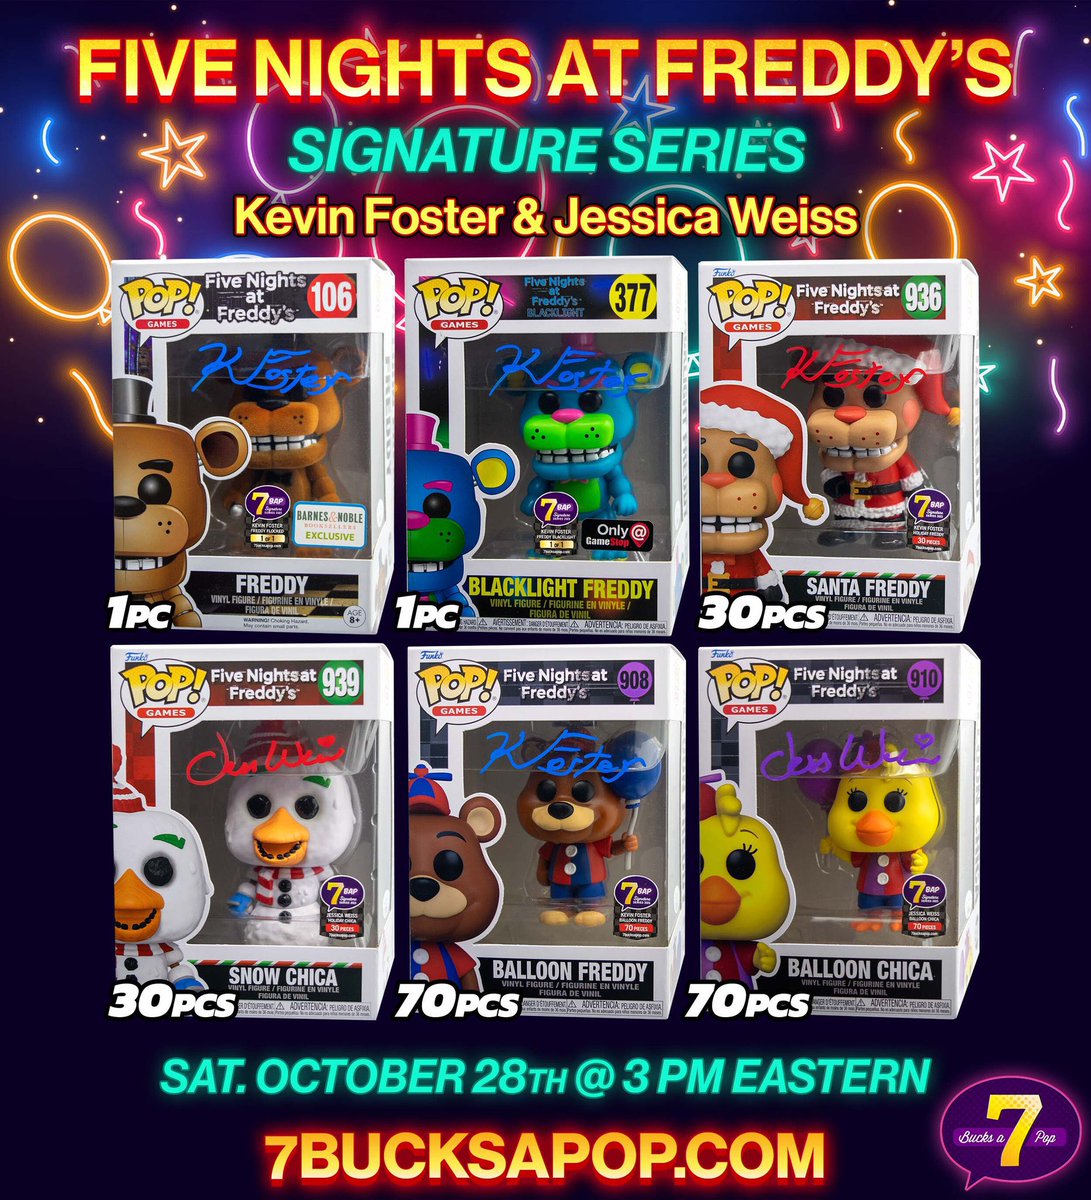 Available Now: #7BAPSignatureSeries - Five Nights at Freddy's! #Ad 7bucksapop.com/collections/7b… #7BAP #Funko #Funkopop #Popvinyl #Pop #Halloween #jsaauthenticated #practicesafesigs